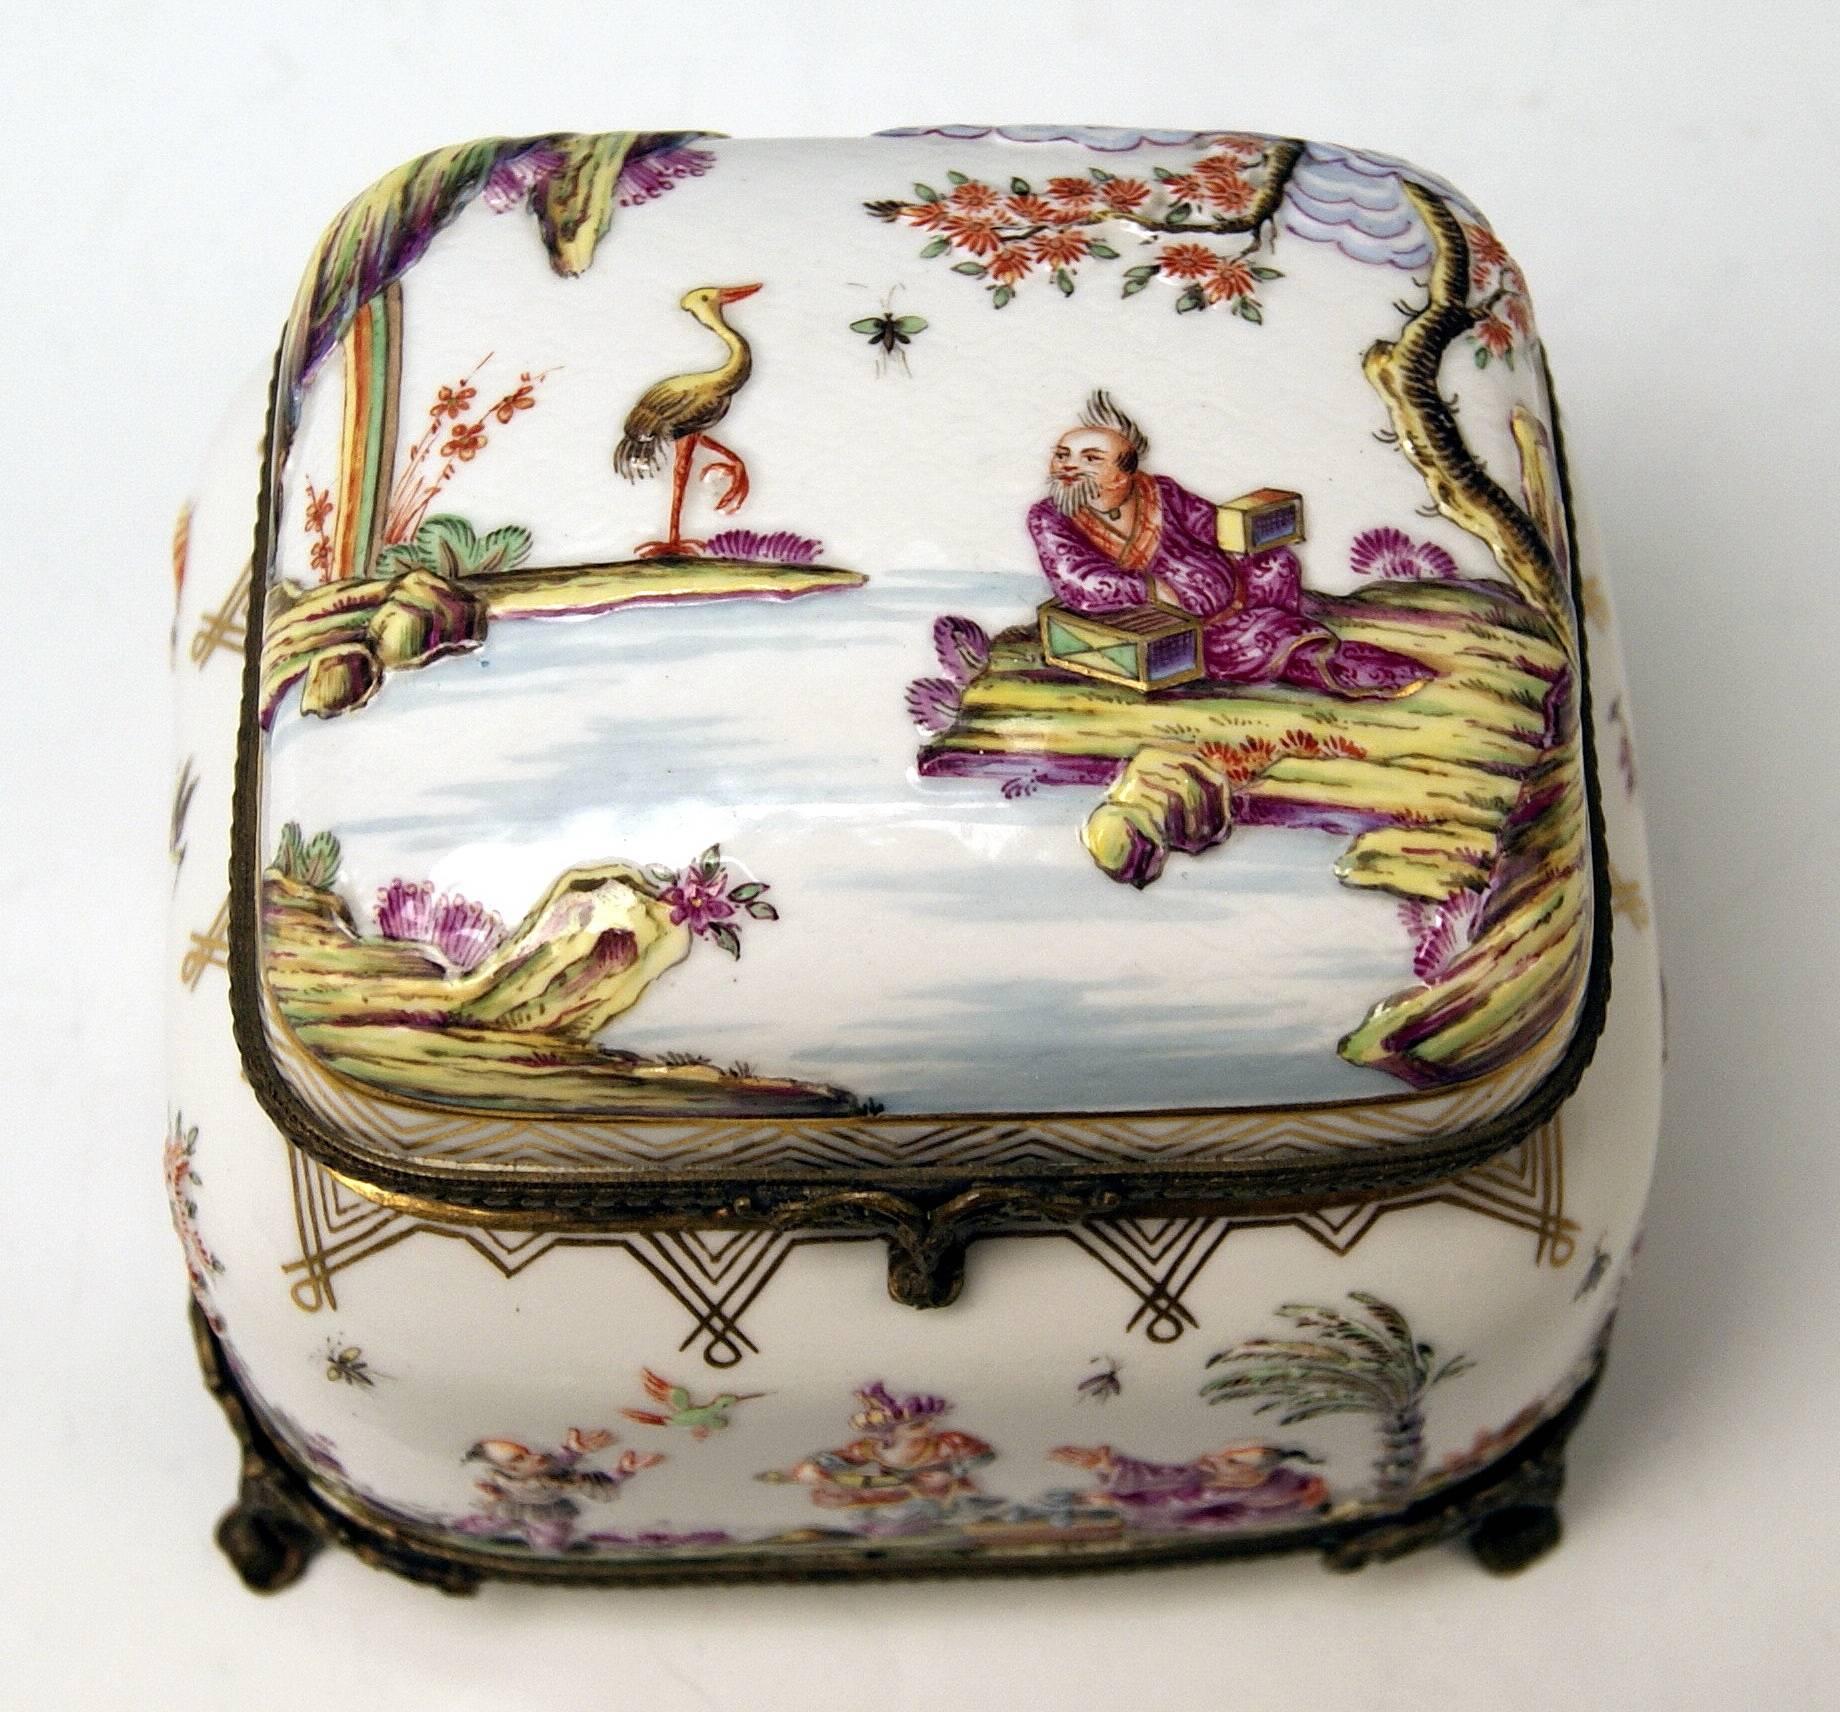 Porcelain Meissen Painted Lidded Box Relief Decoration Chinoiserie Brass Mountings c.1850